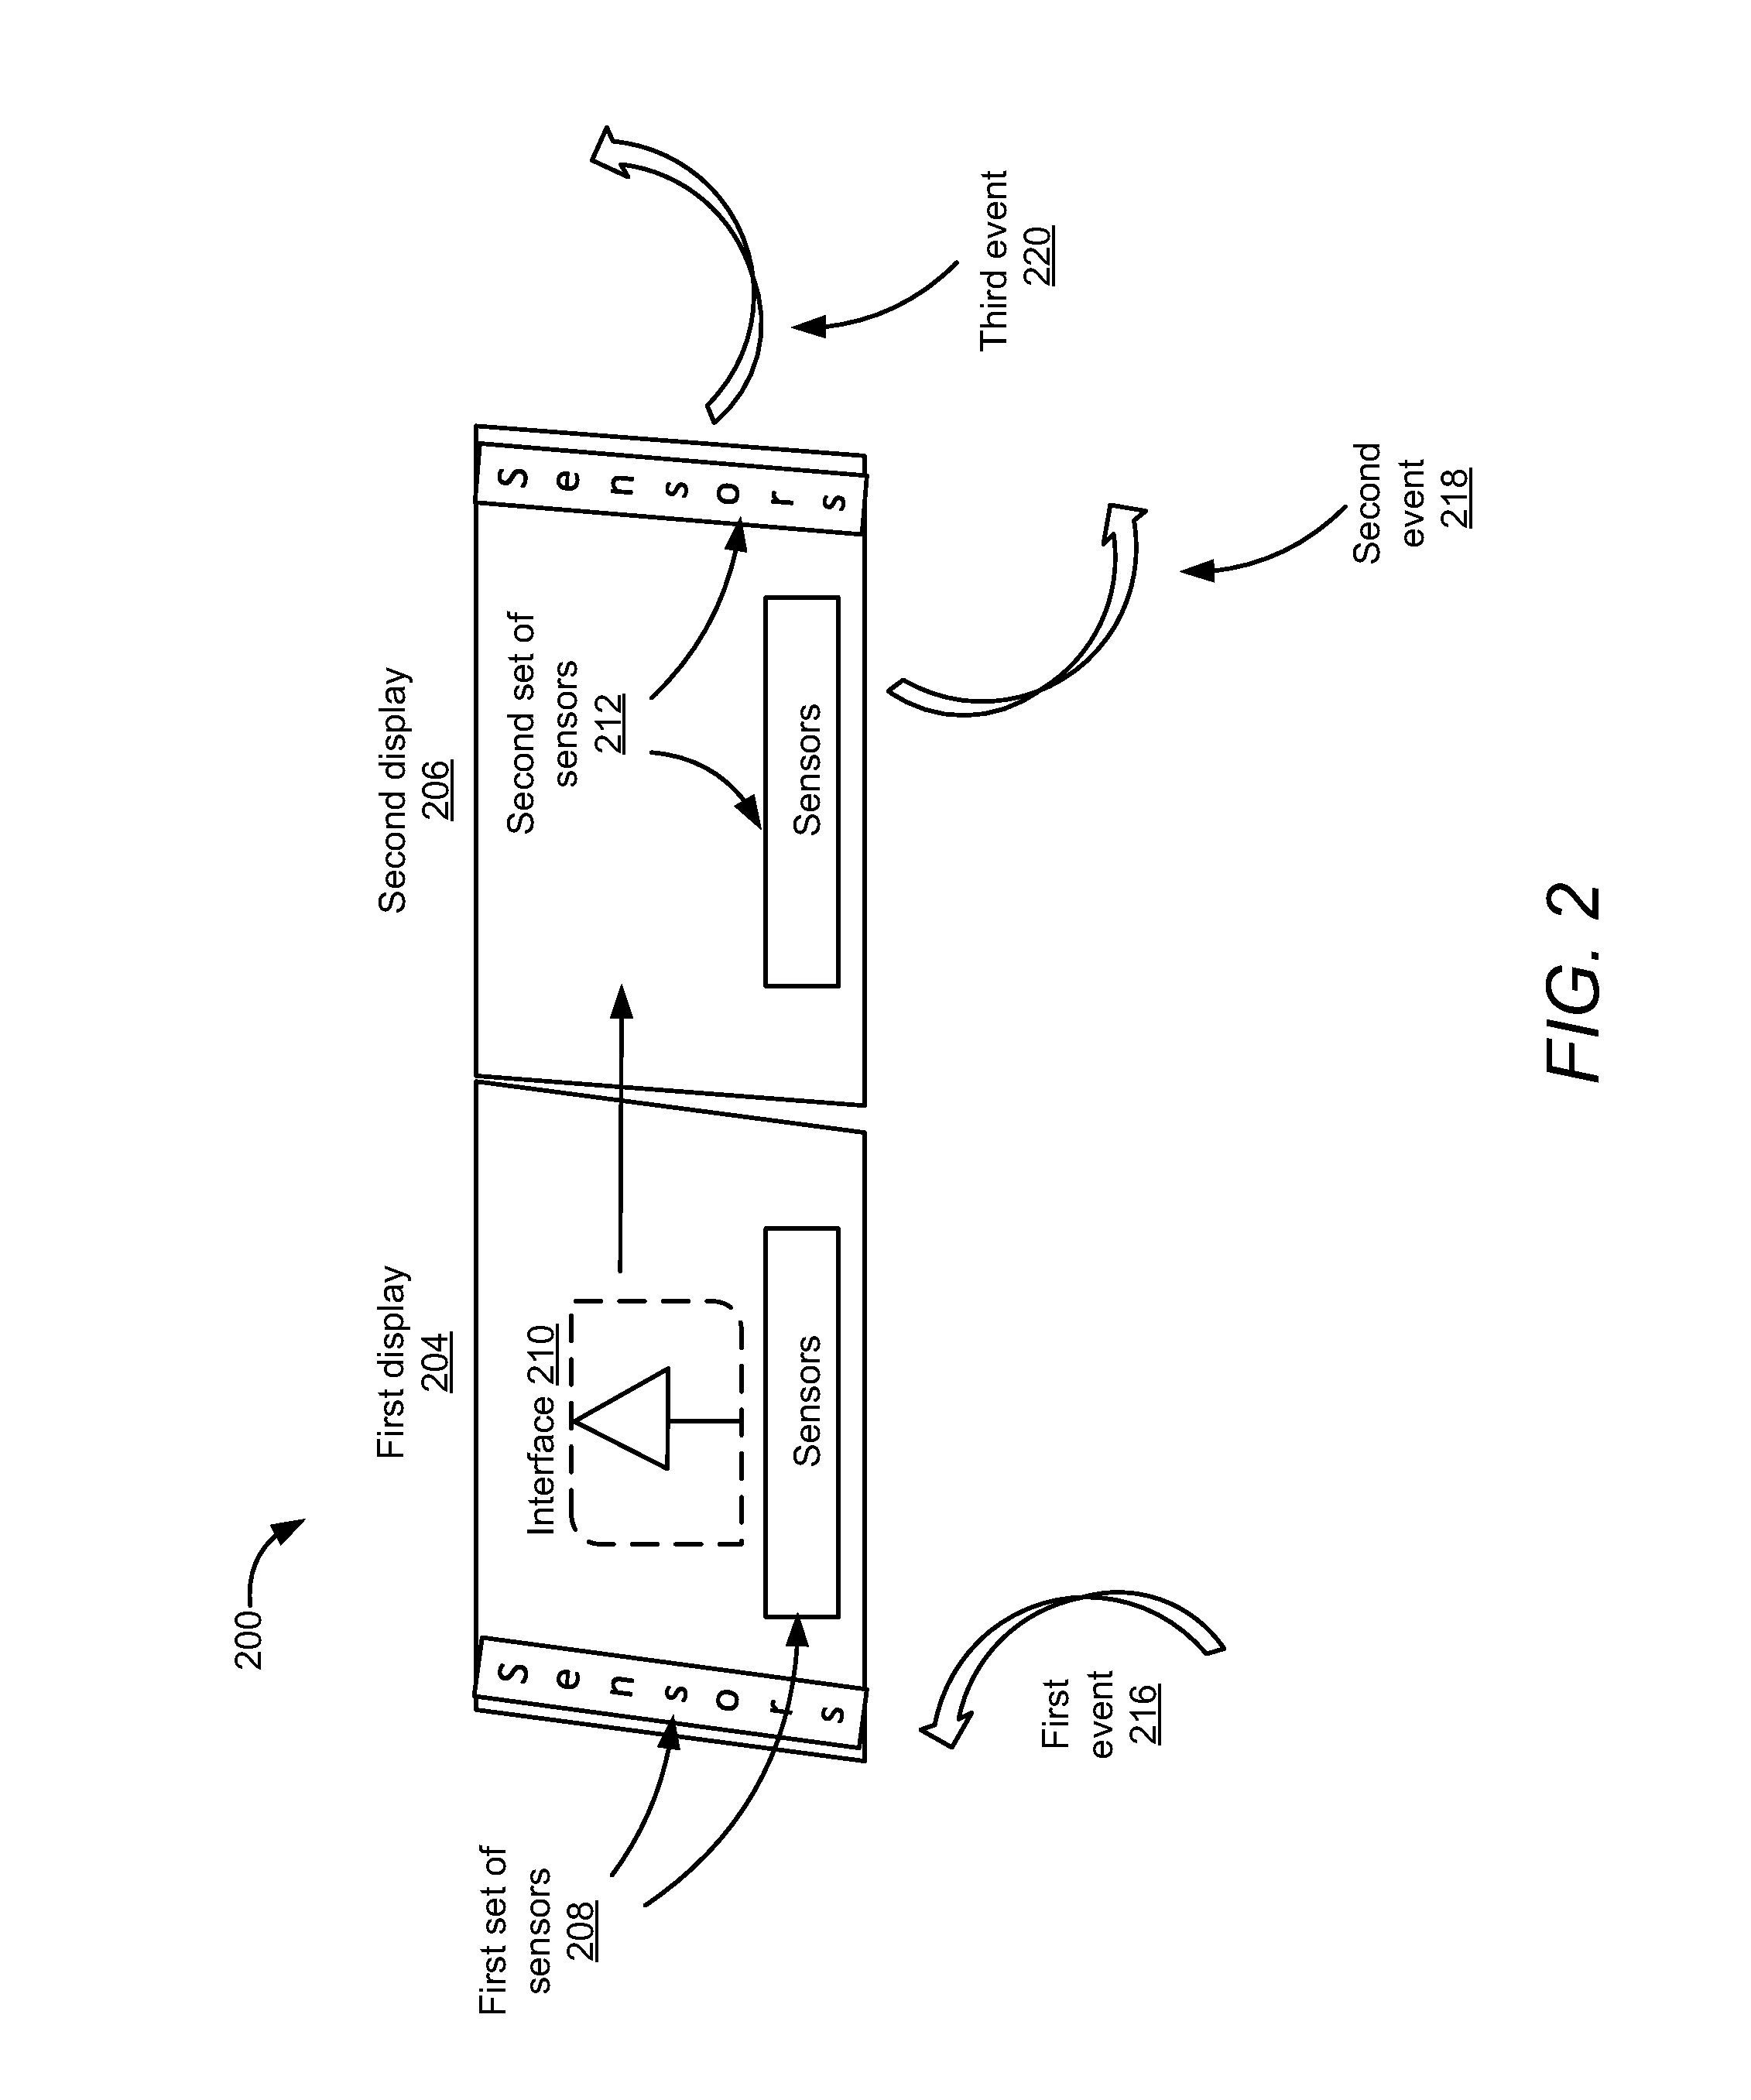 Method and system for virtualized sensors in a multi-sensor environment